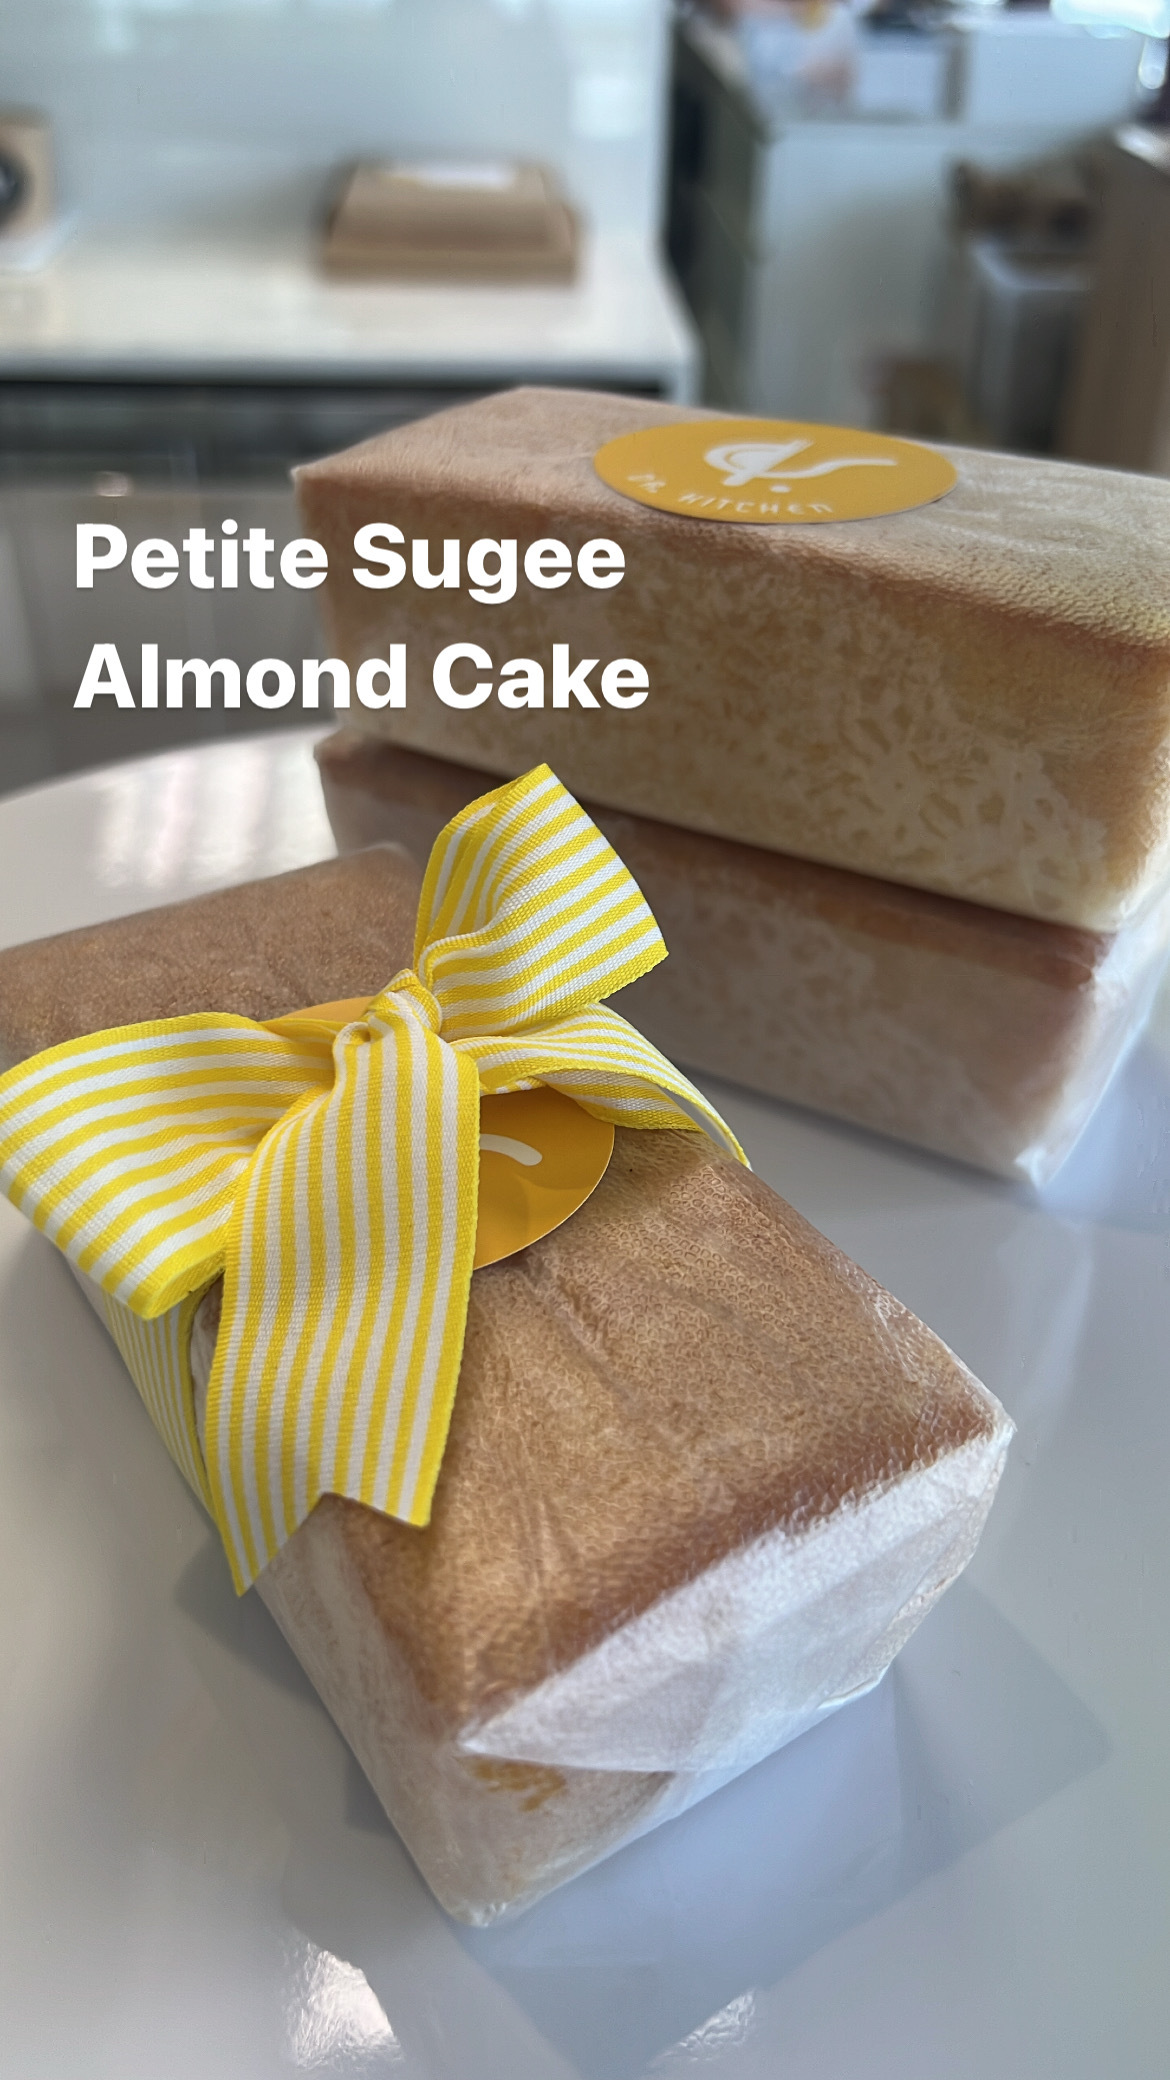 Petite Sugee Almond Cake with Ribbon